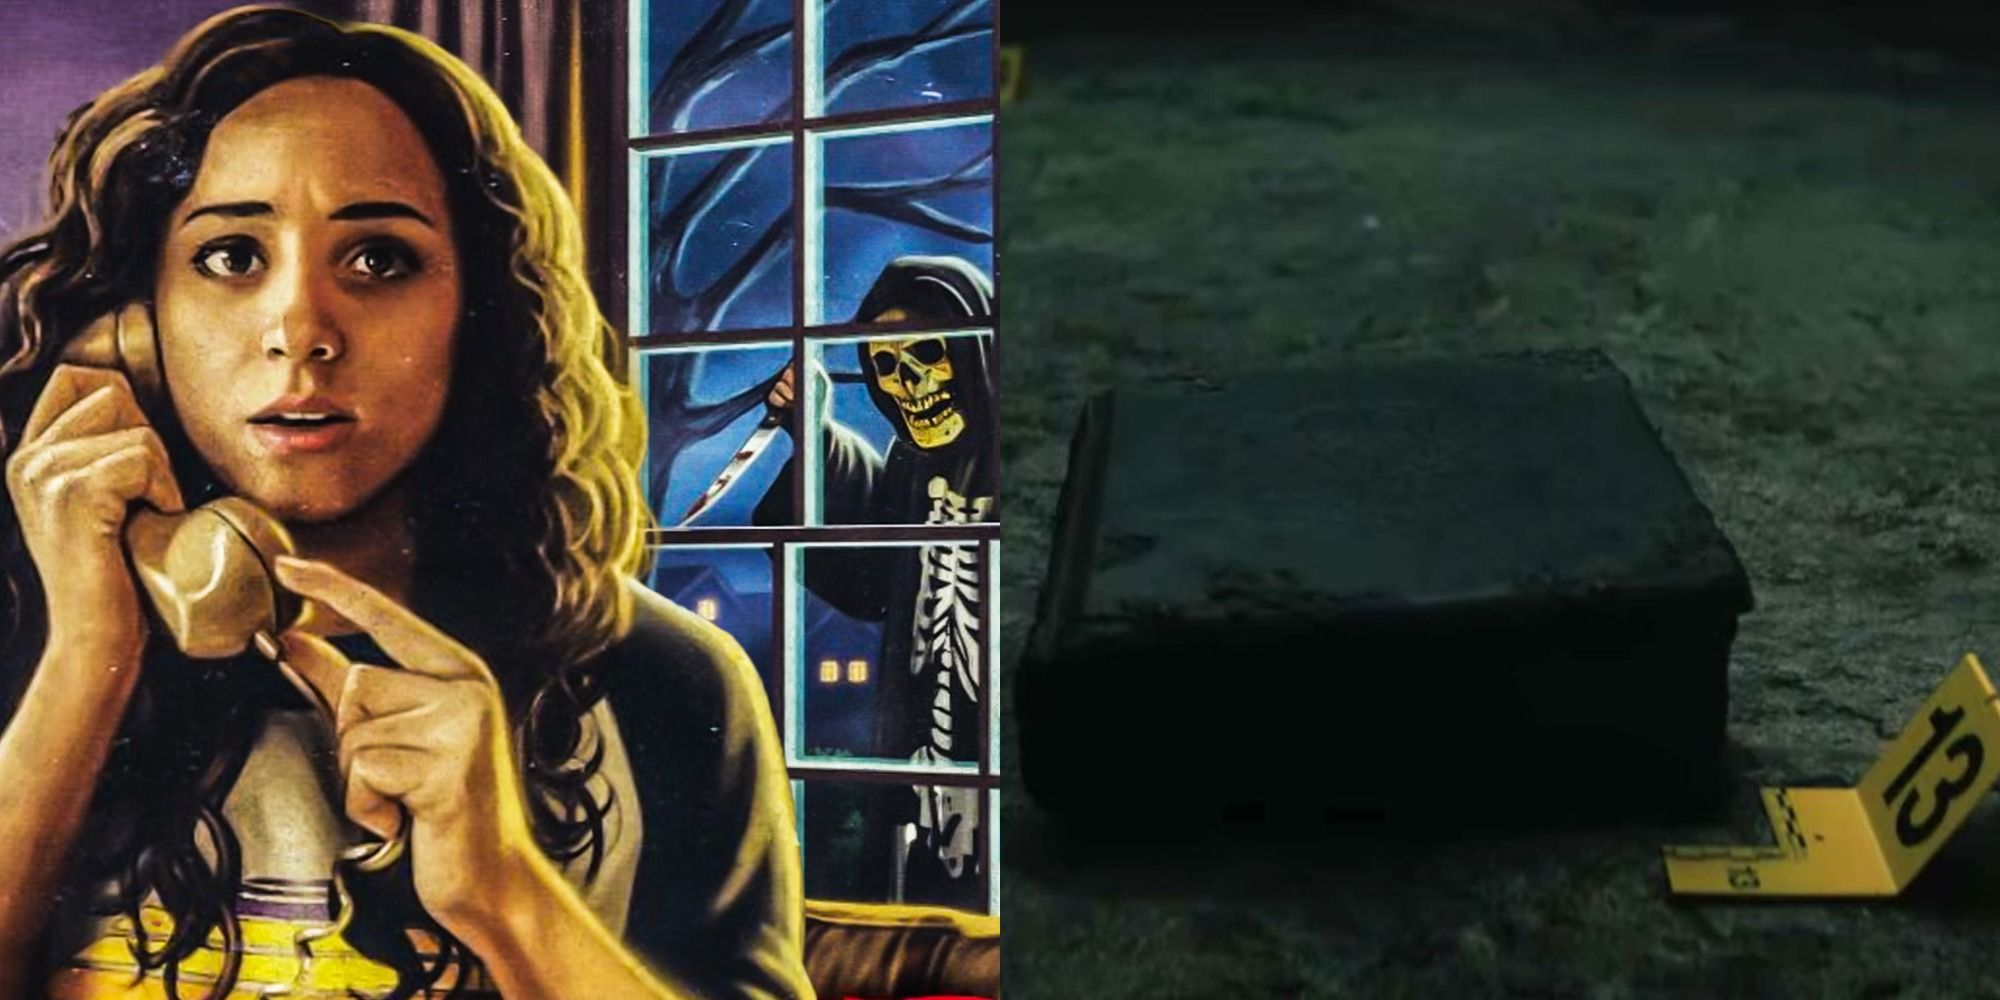 Deena on the phone while Skull Mask lurks outside her window beside an image of the end credits grimoire book in Fear Street 1994 Part 2